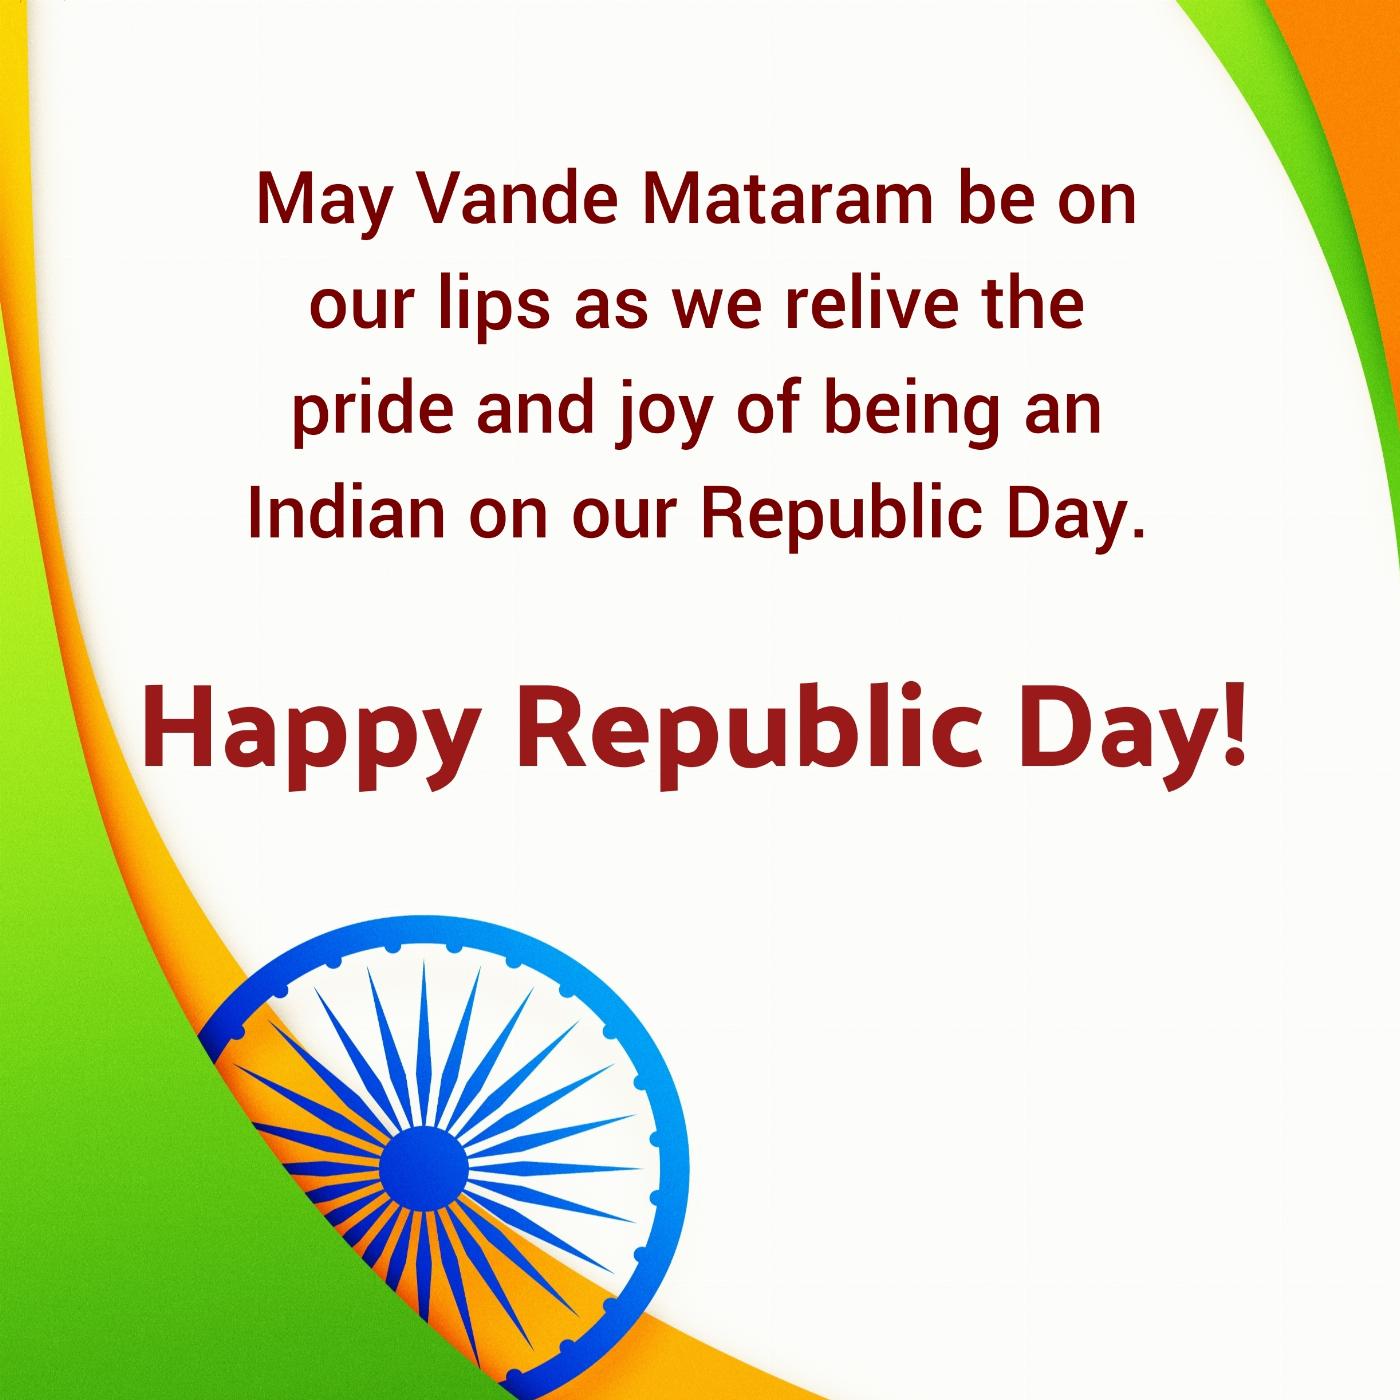 May Vande Mataram be on our lips as we relive the pride